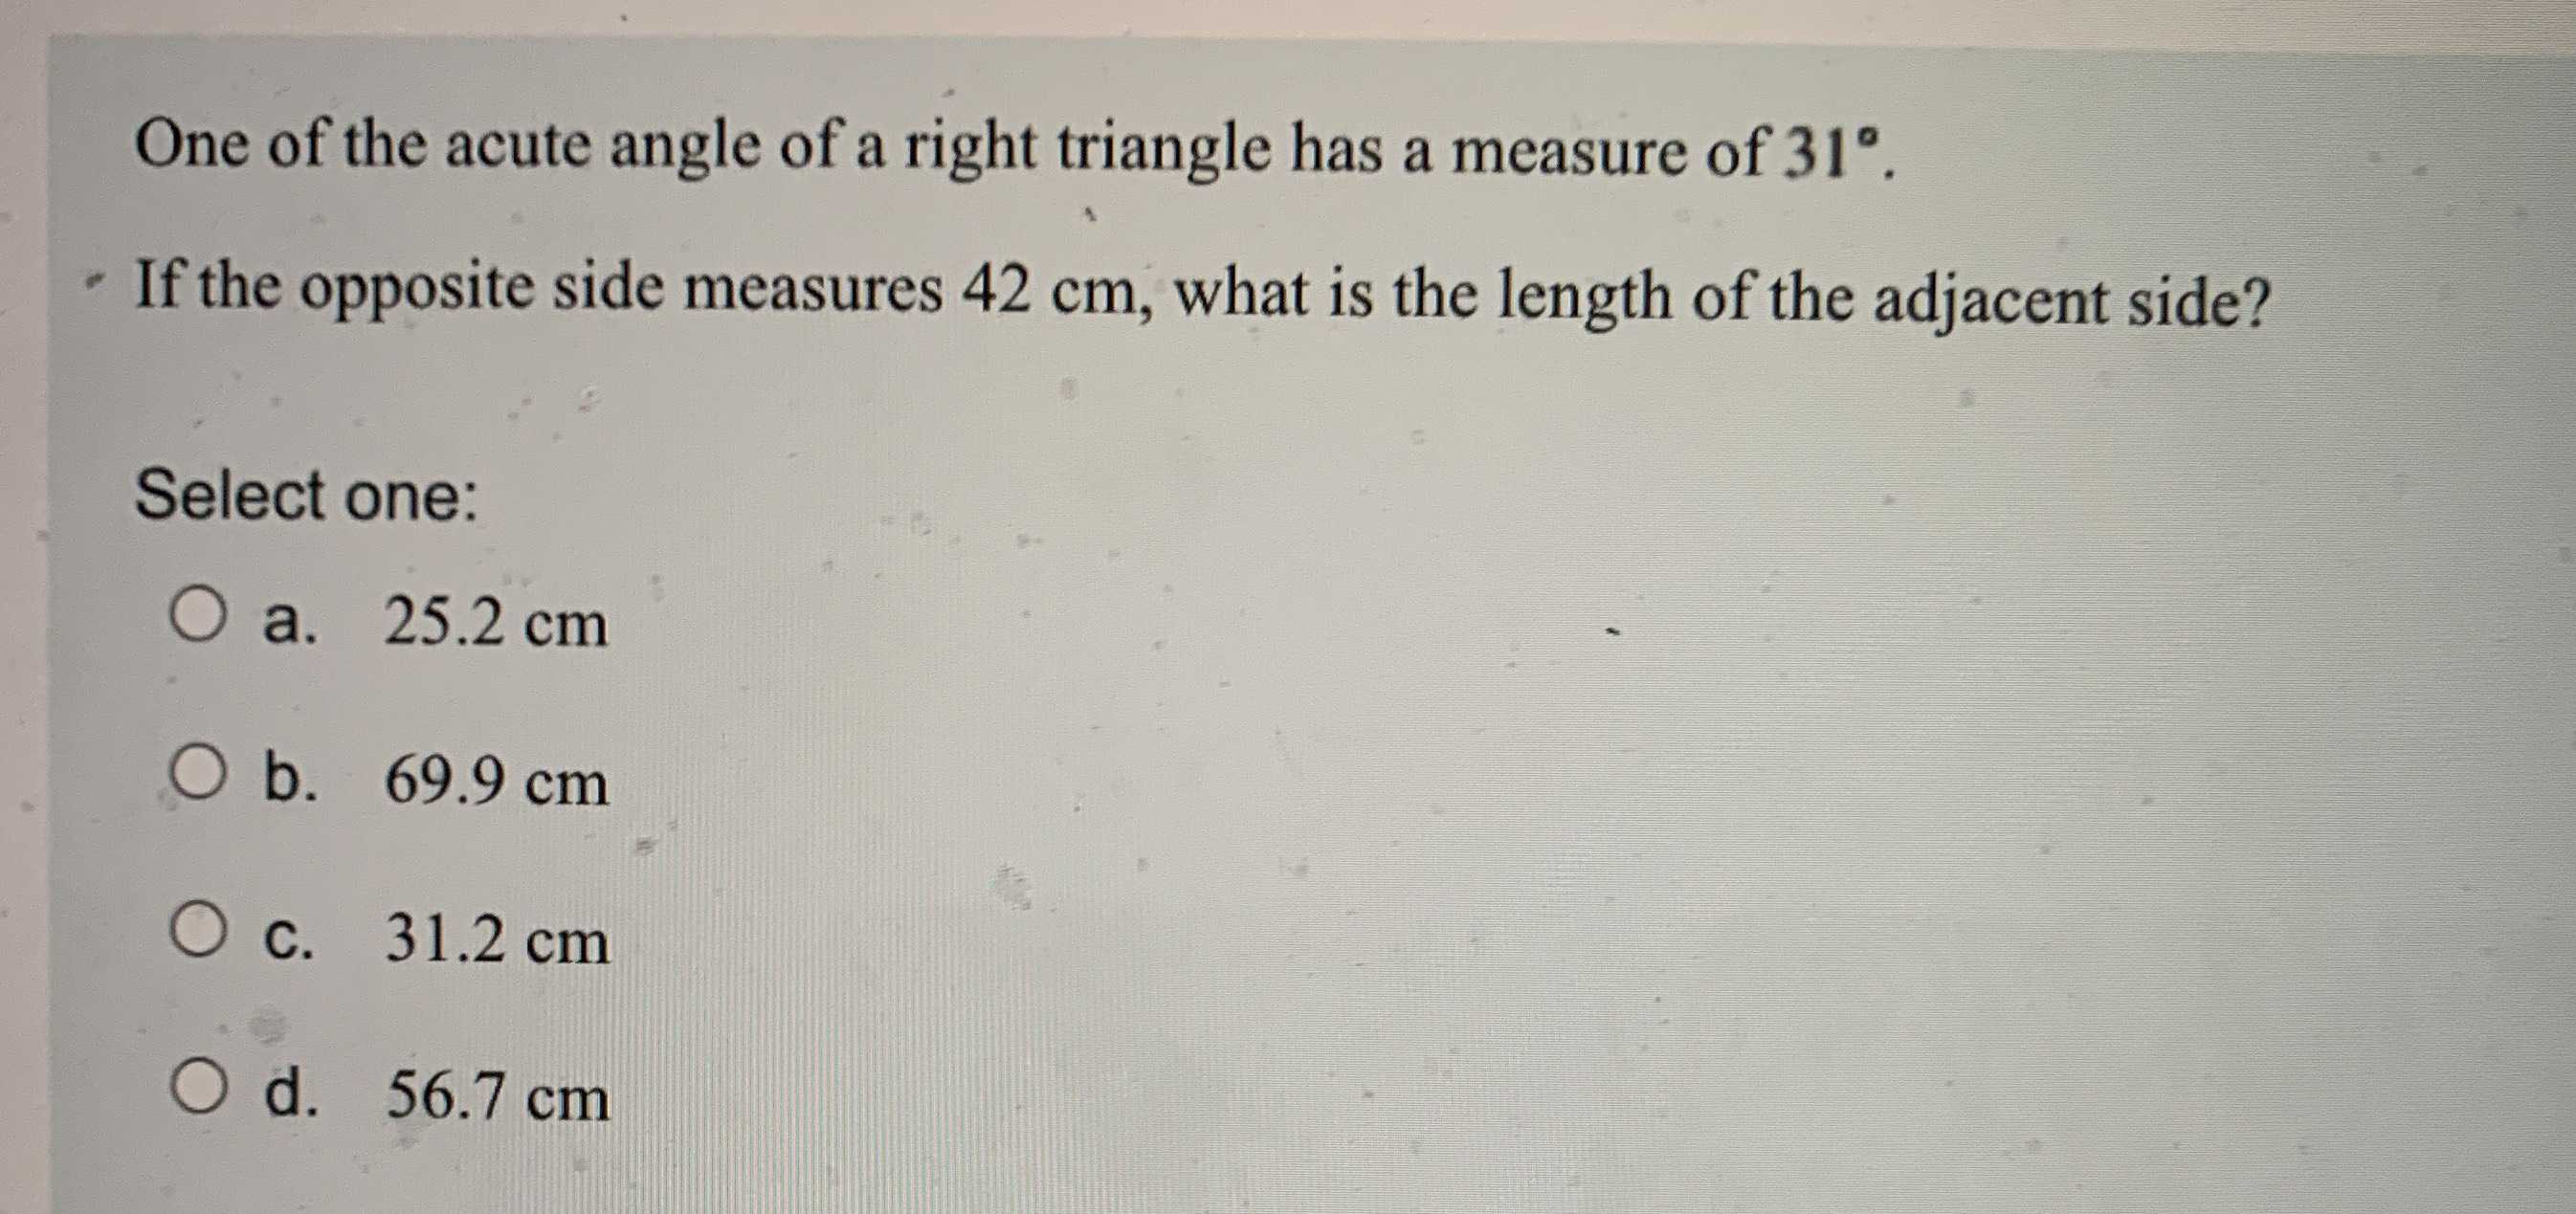 One of the acute angle of a right triangle has a m...